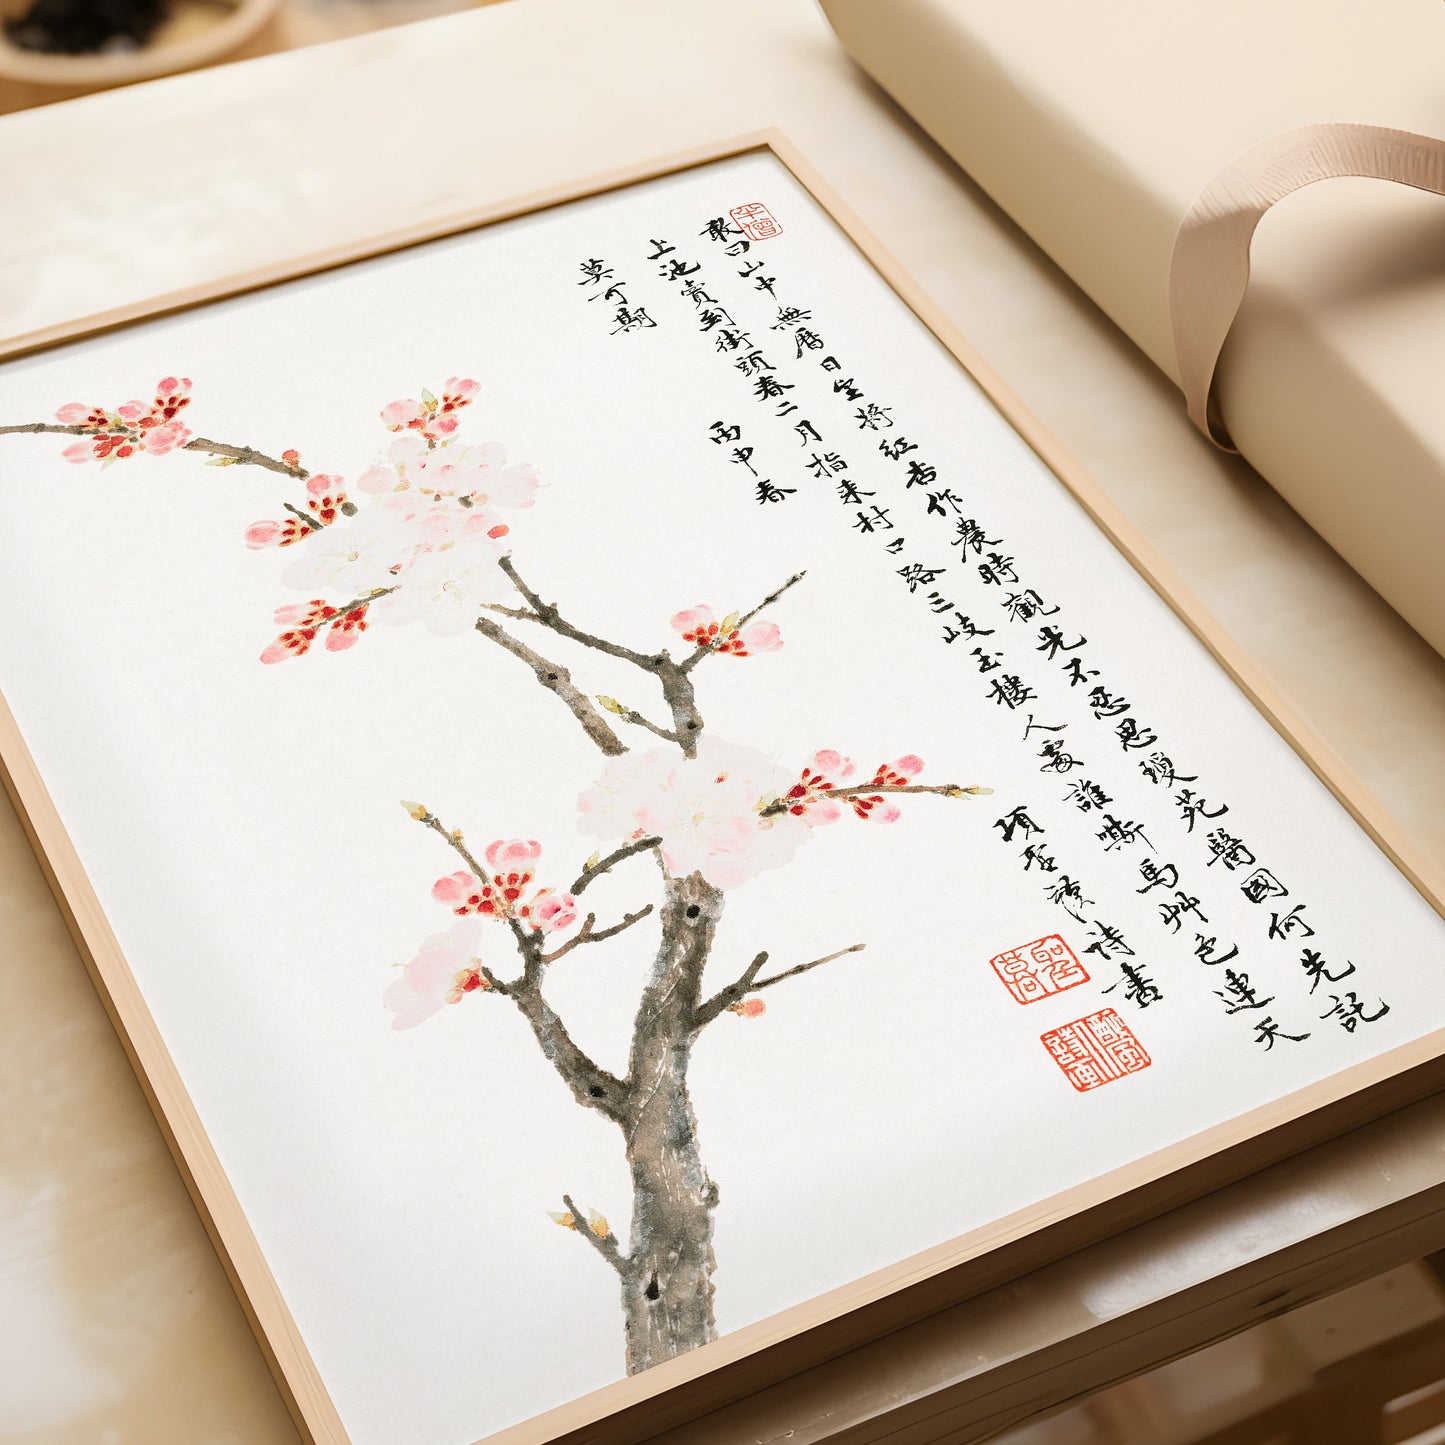 Xiang Shengmo - Cherry Blossoms with Poem | Vintage Chinese Art (available framed or unframed)